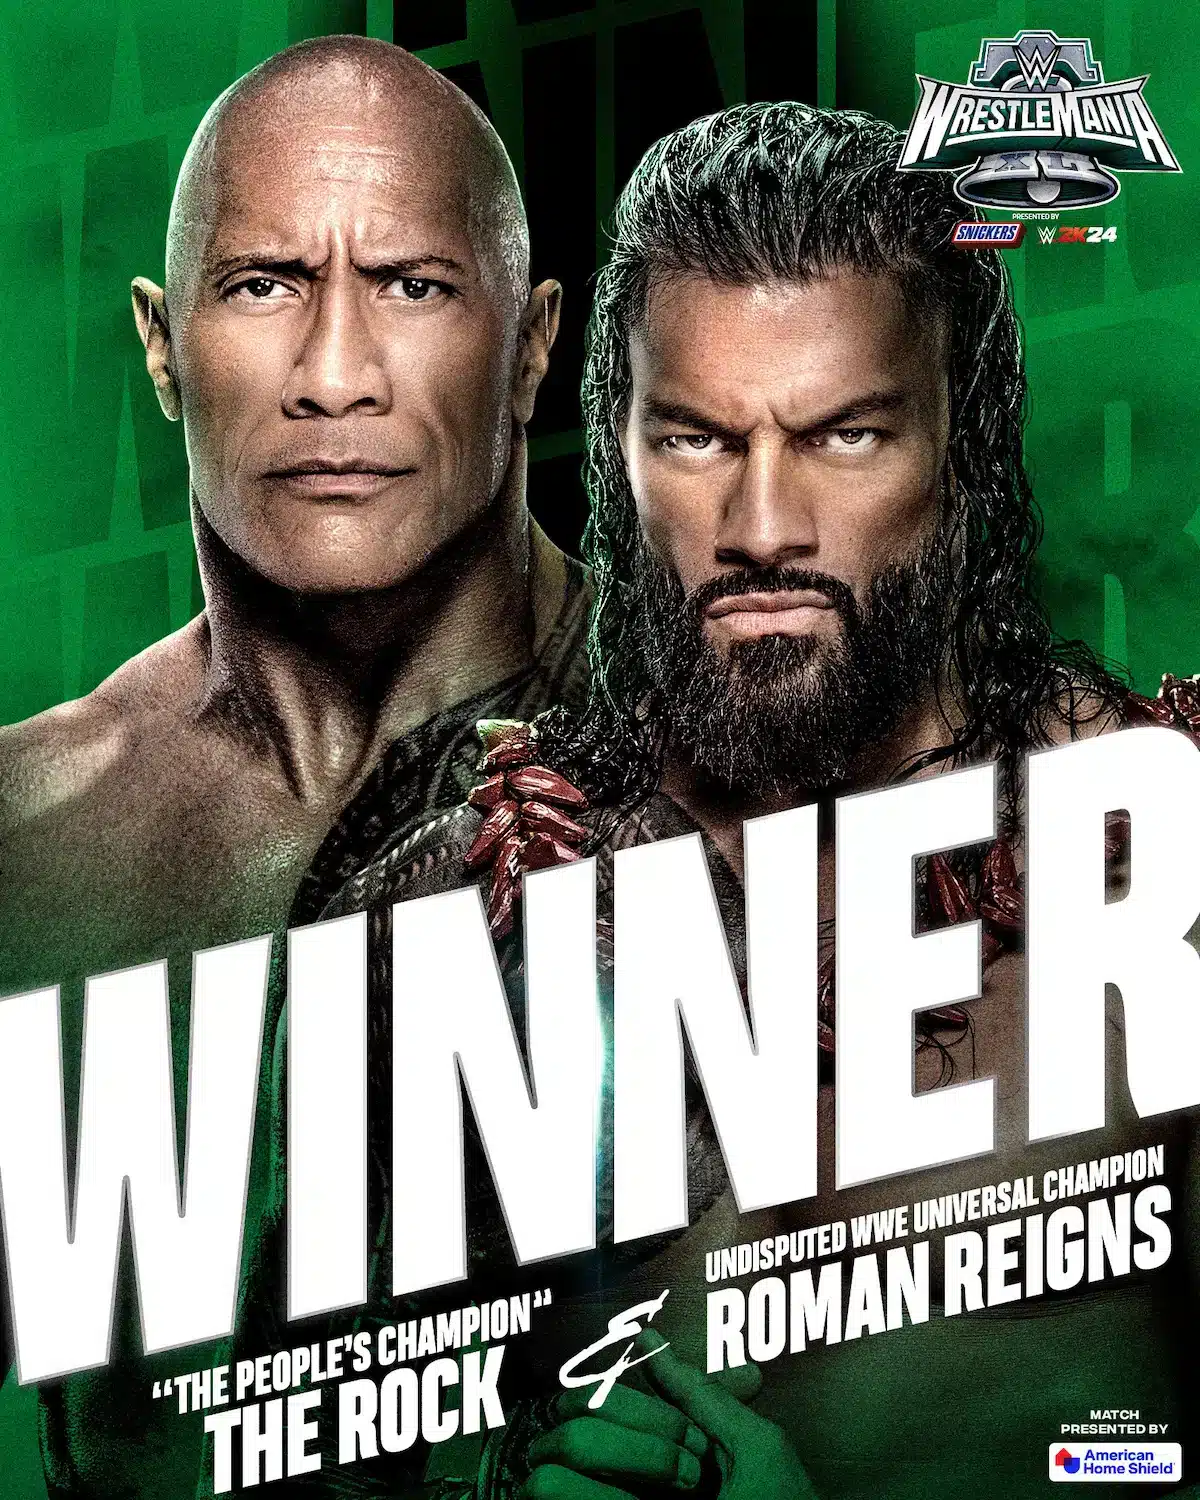 The Rock And Roman Reigns Featured As Winners On A Wwe Publicity Poster After Their Tag Team Win